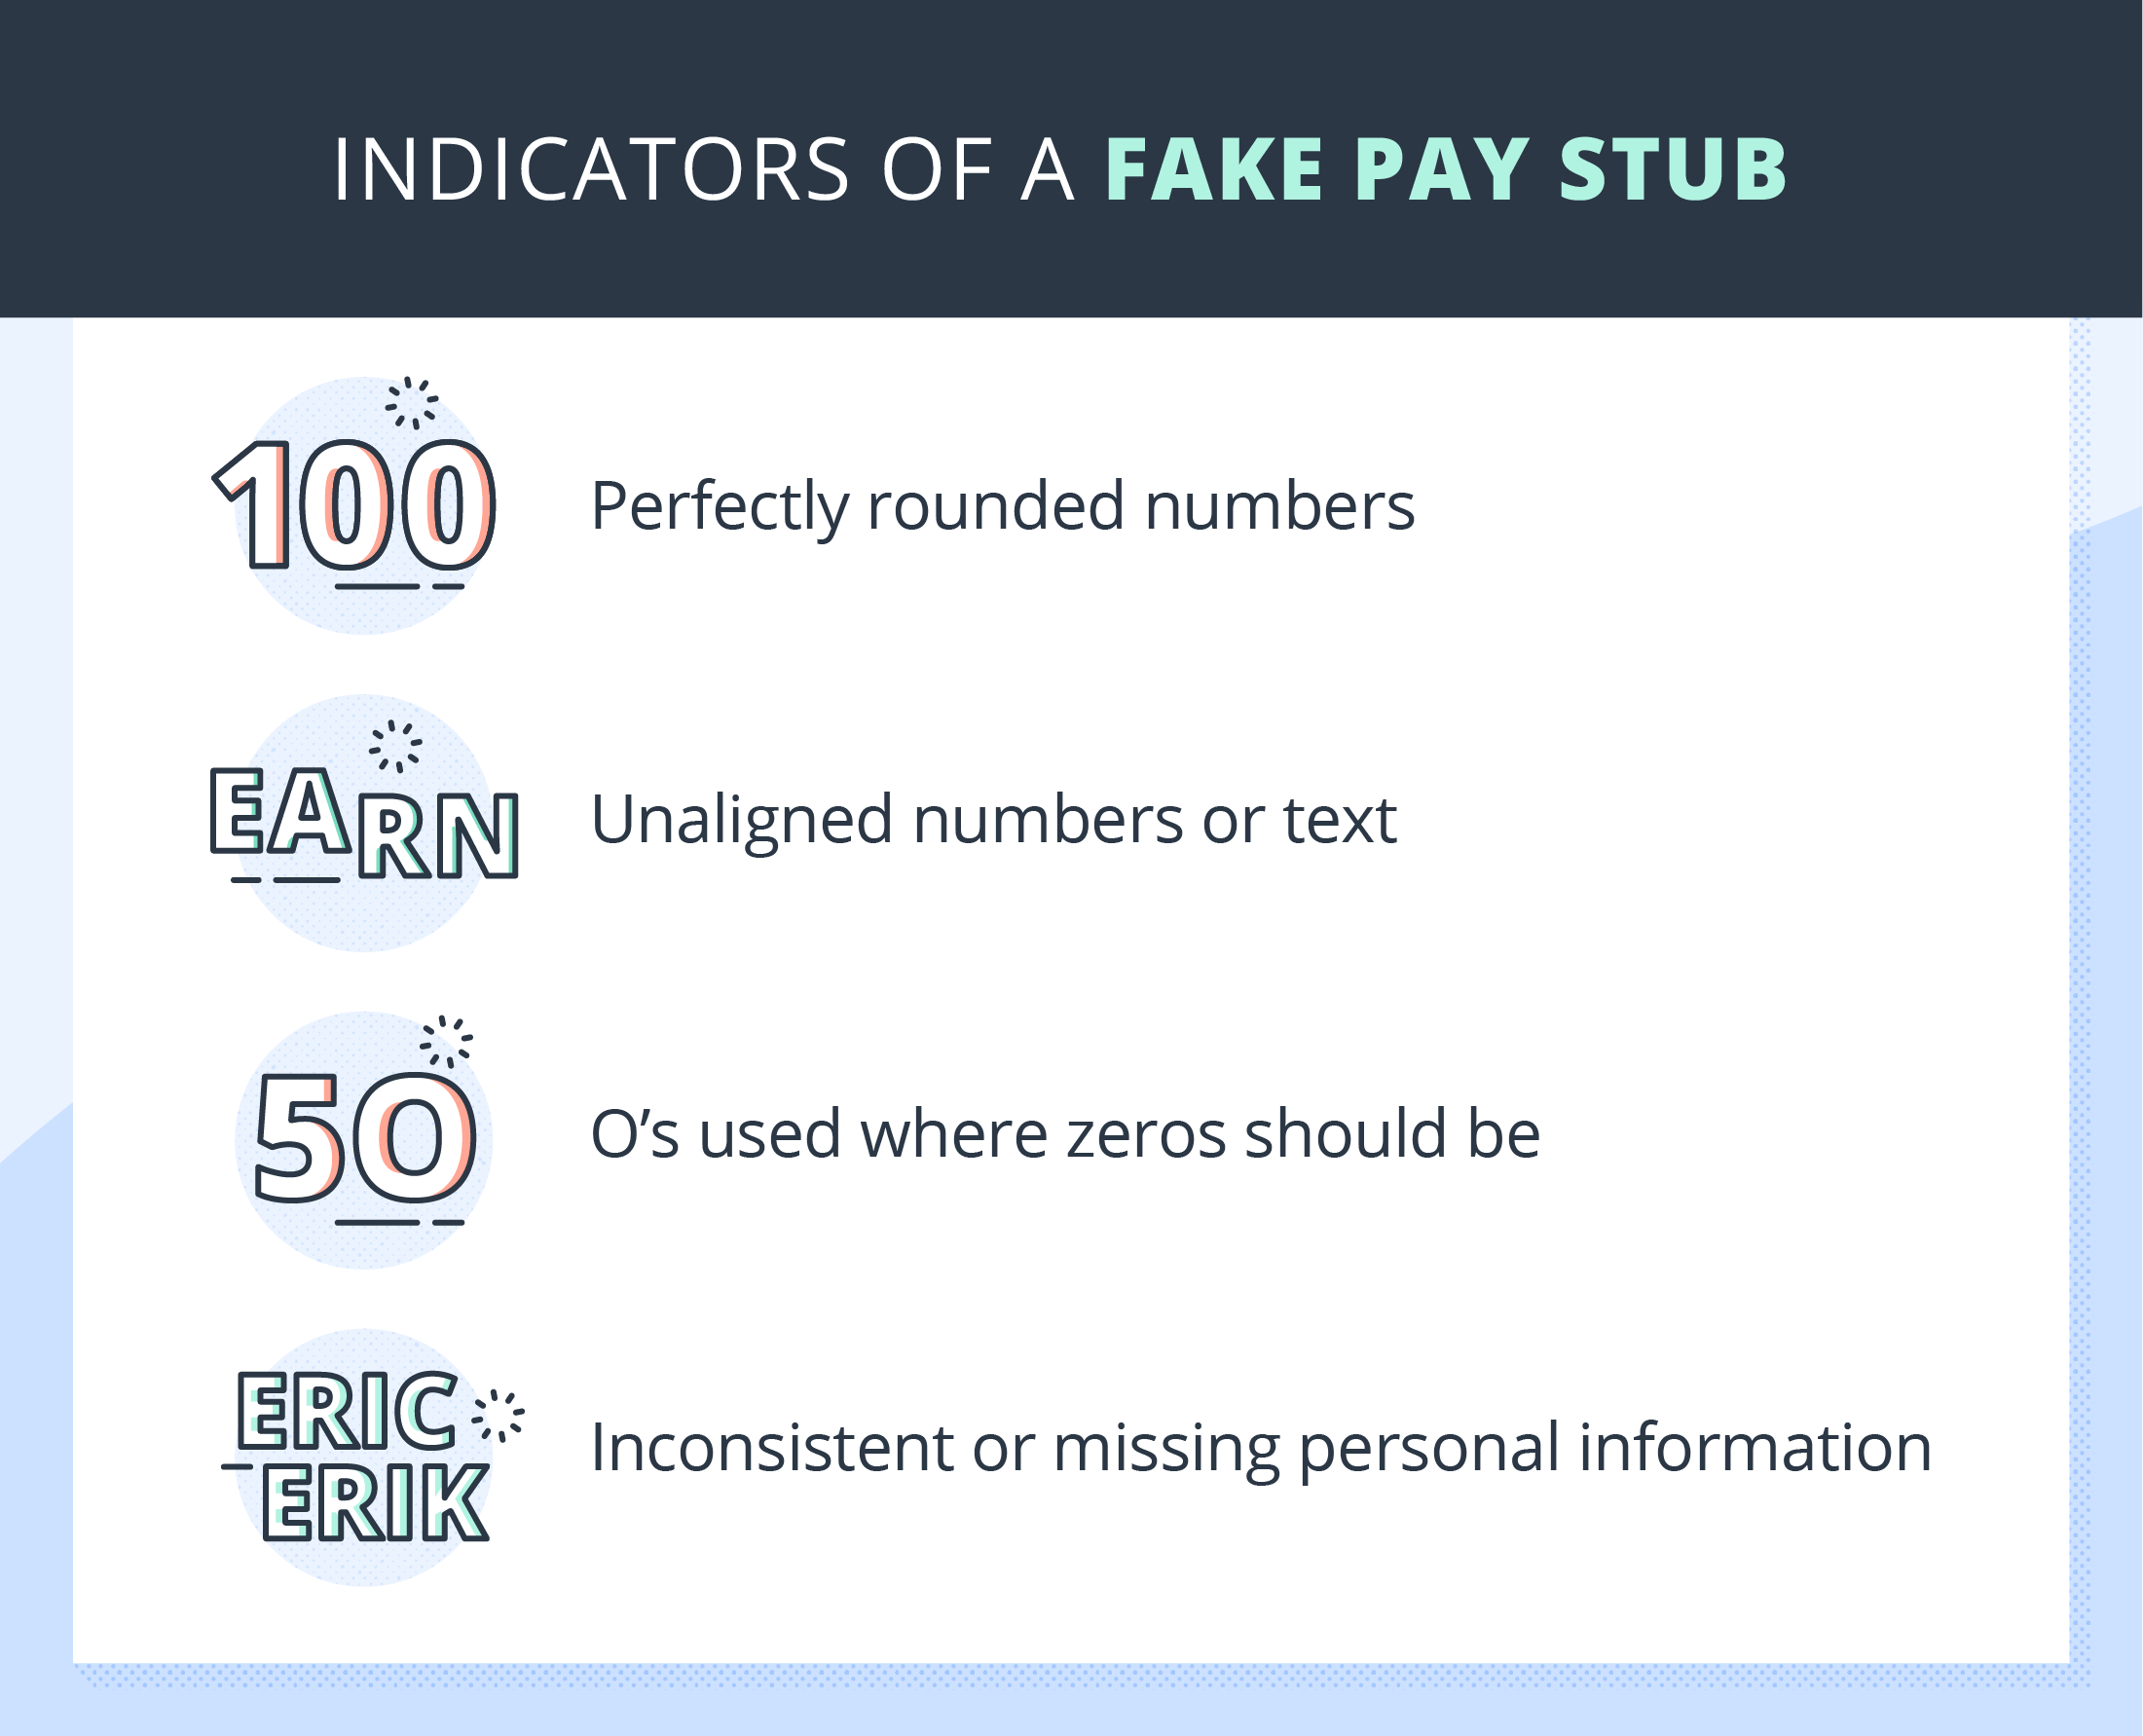 Indicators of a fake pay stub include perfectly rounded numbers, unaligned numbers/text, Os and 0s used interchangeably, and inconsistent or missing personal information.